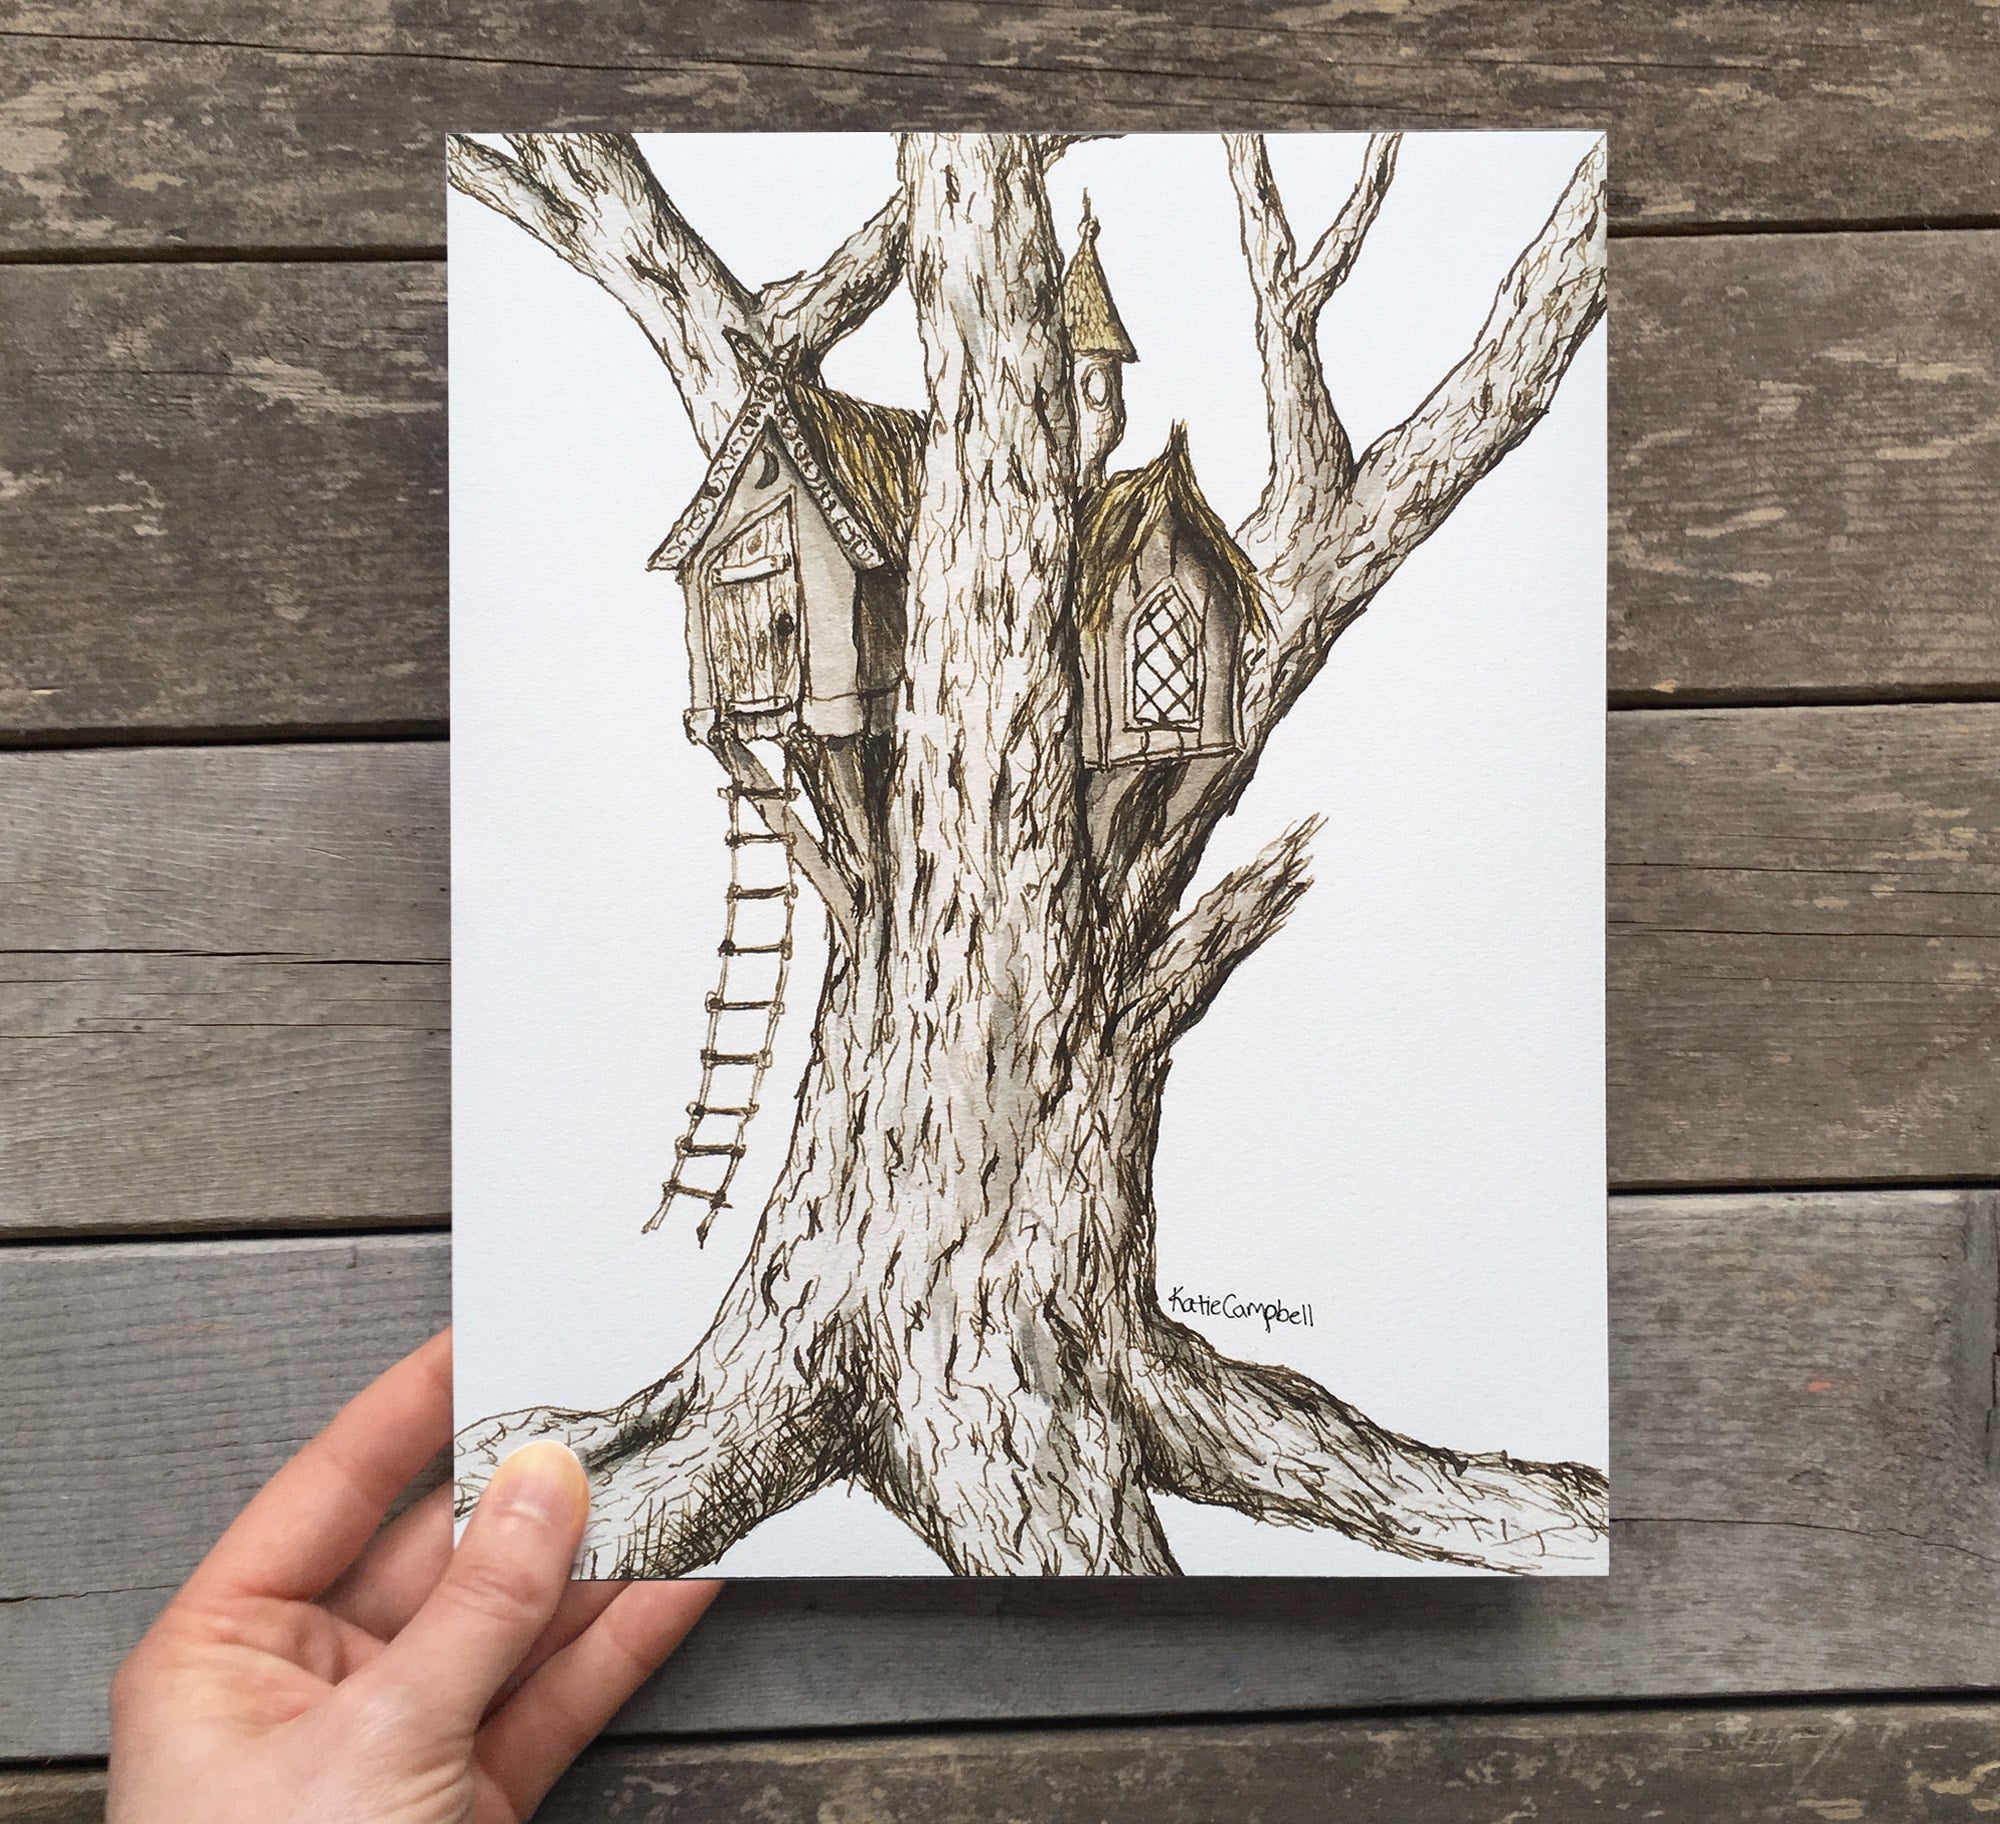 Kids-n-fun.com | 11 coloring pages of Treehouse